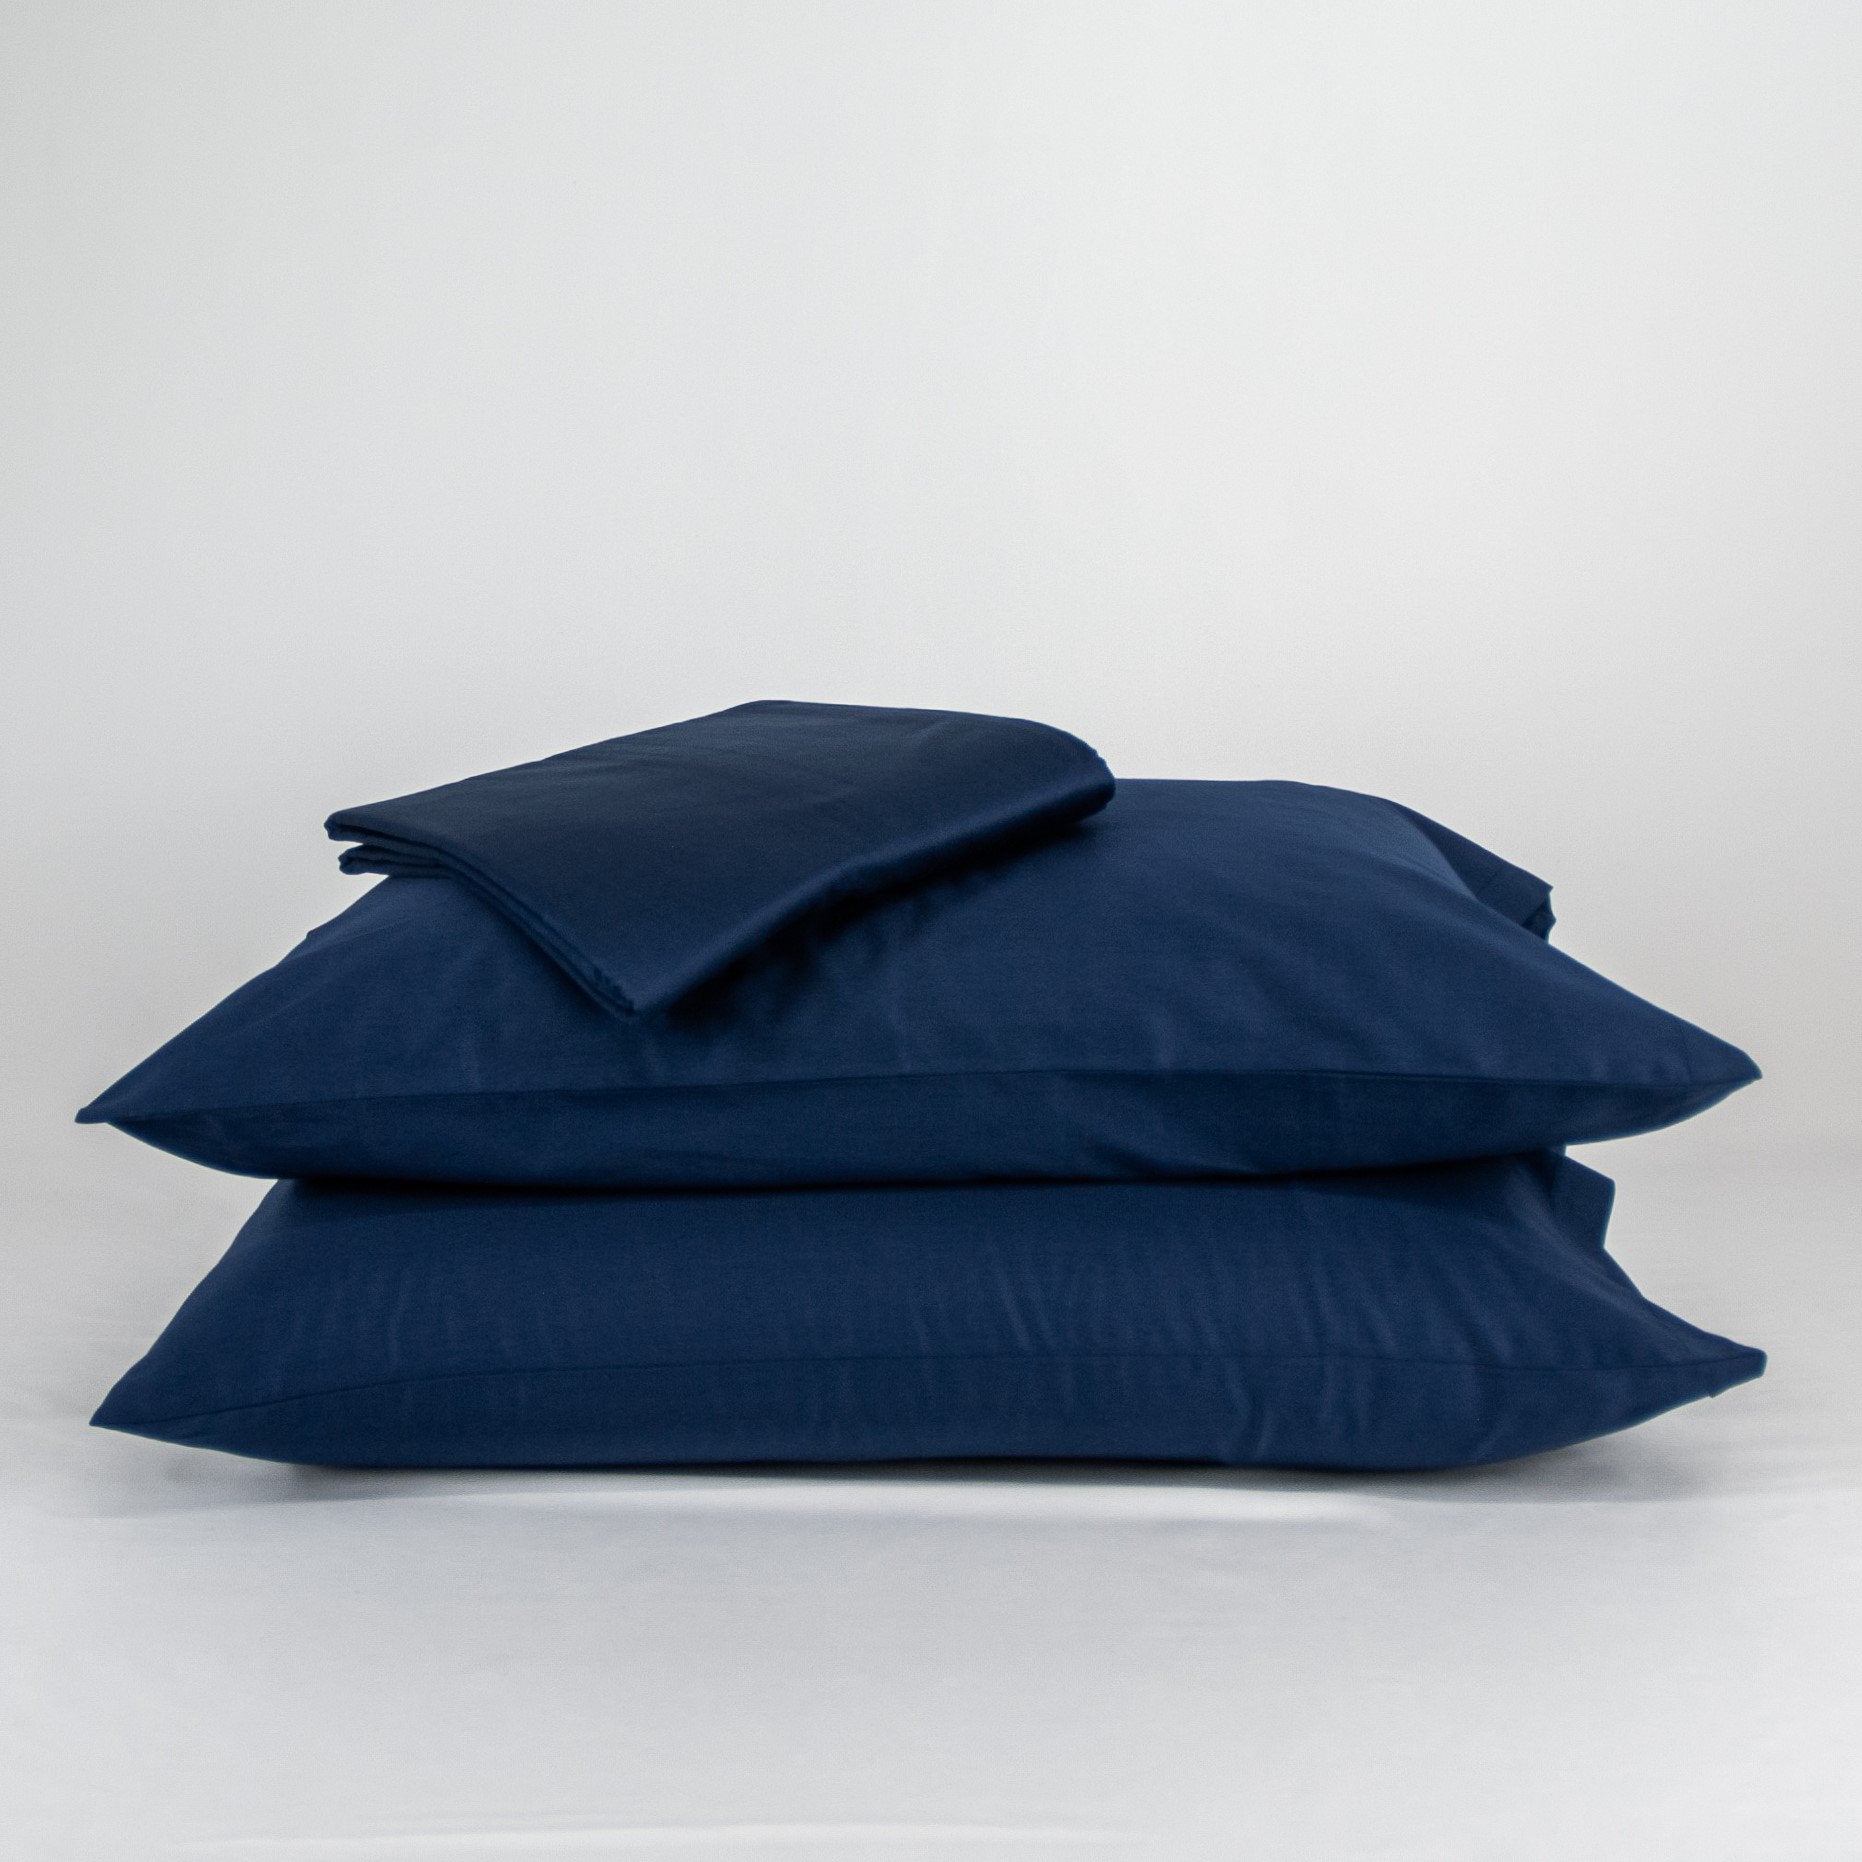 Stacked organic cotton pillowcases and sheets in classic blue